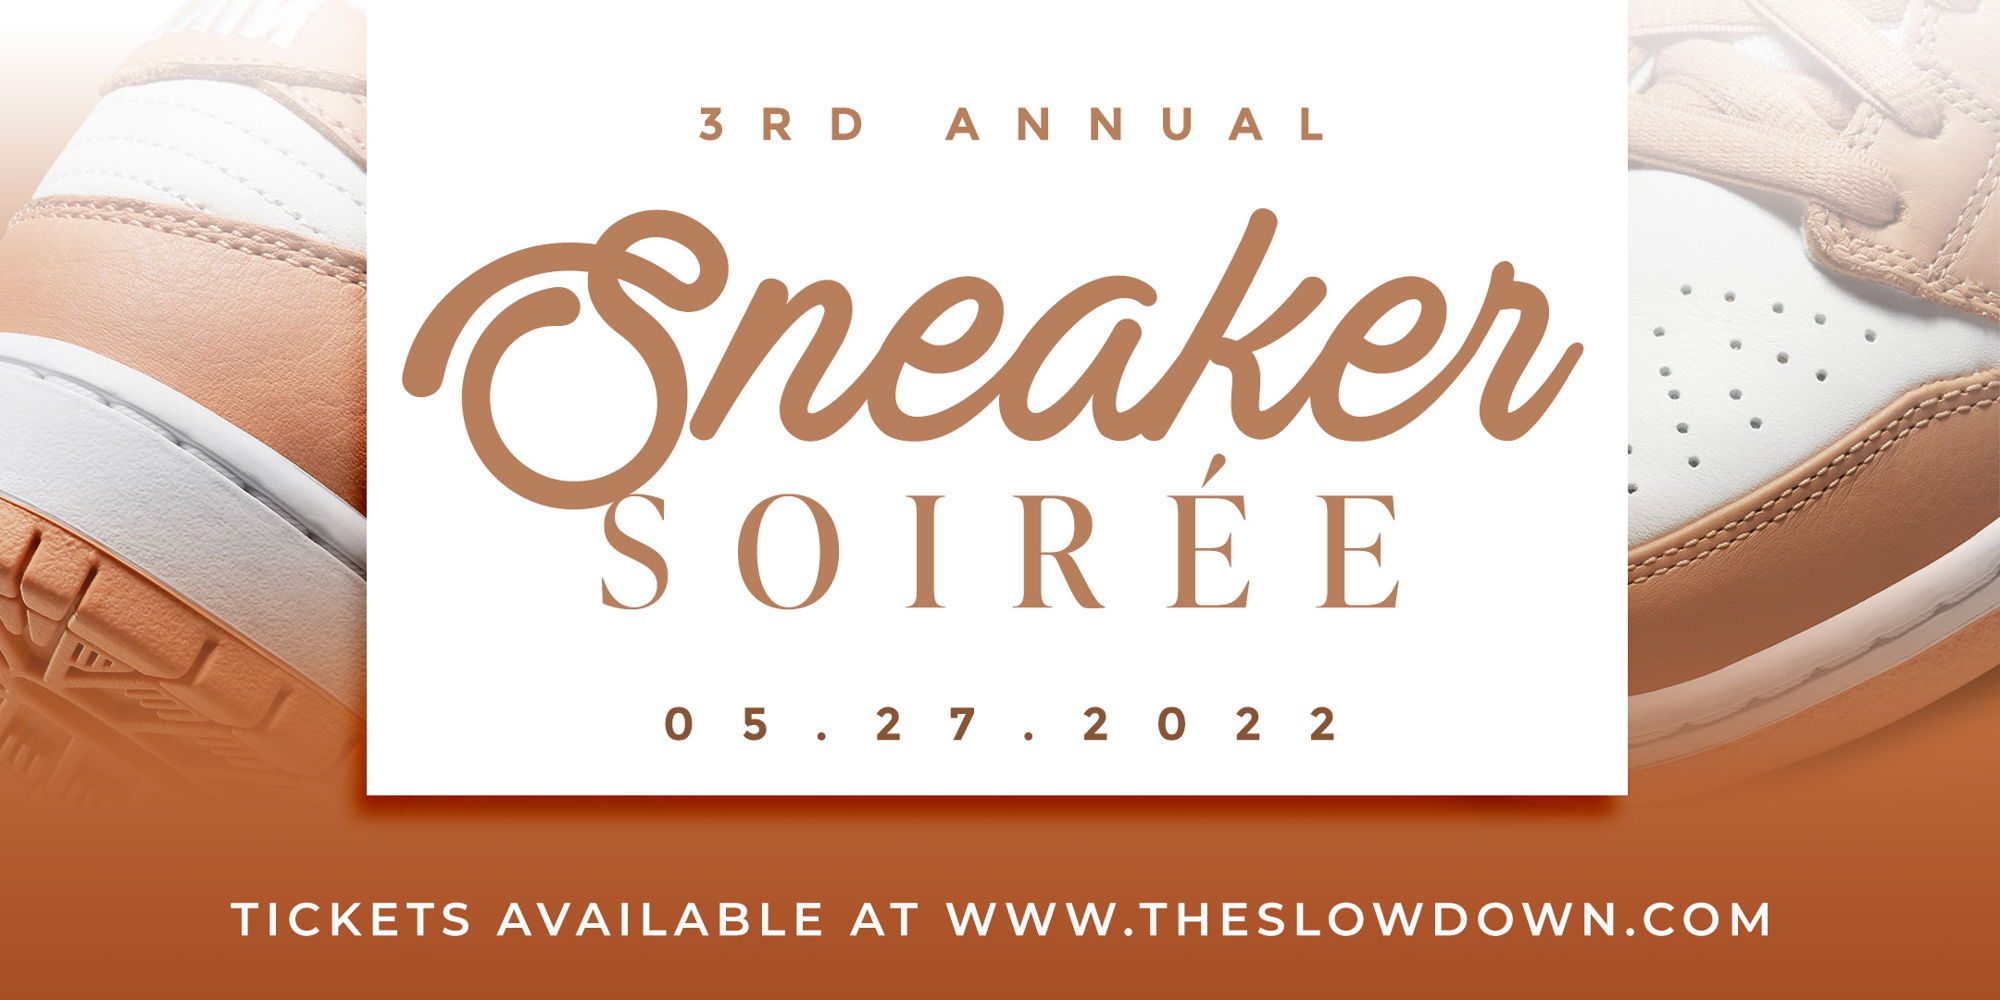 The 3rd Annual Sneaker Soiree promotional image